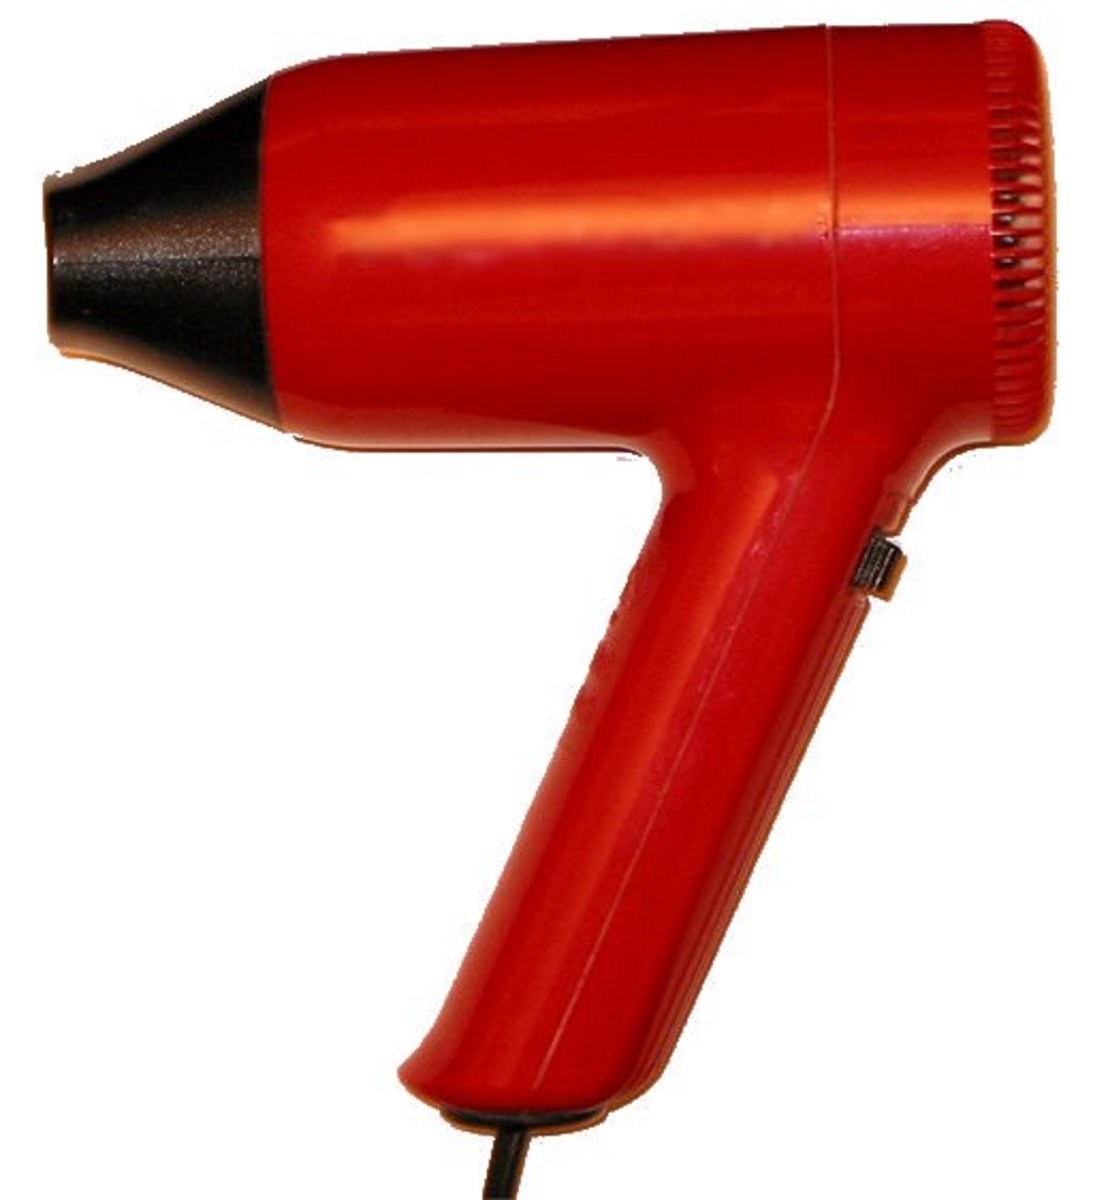 Use an ordinary hair dryer to immediately stop the itch of poison ivy, oak, or sumac.